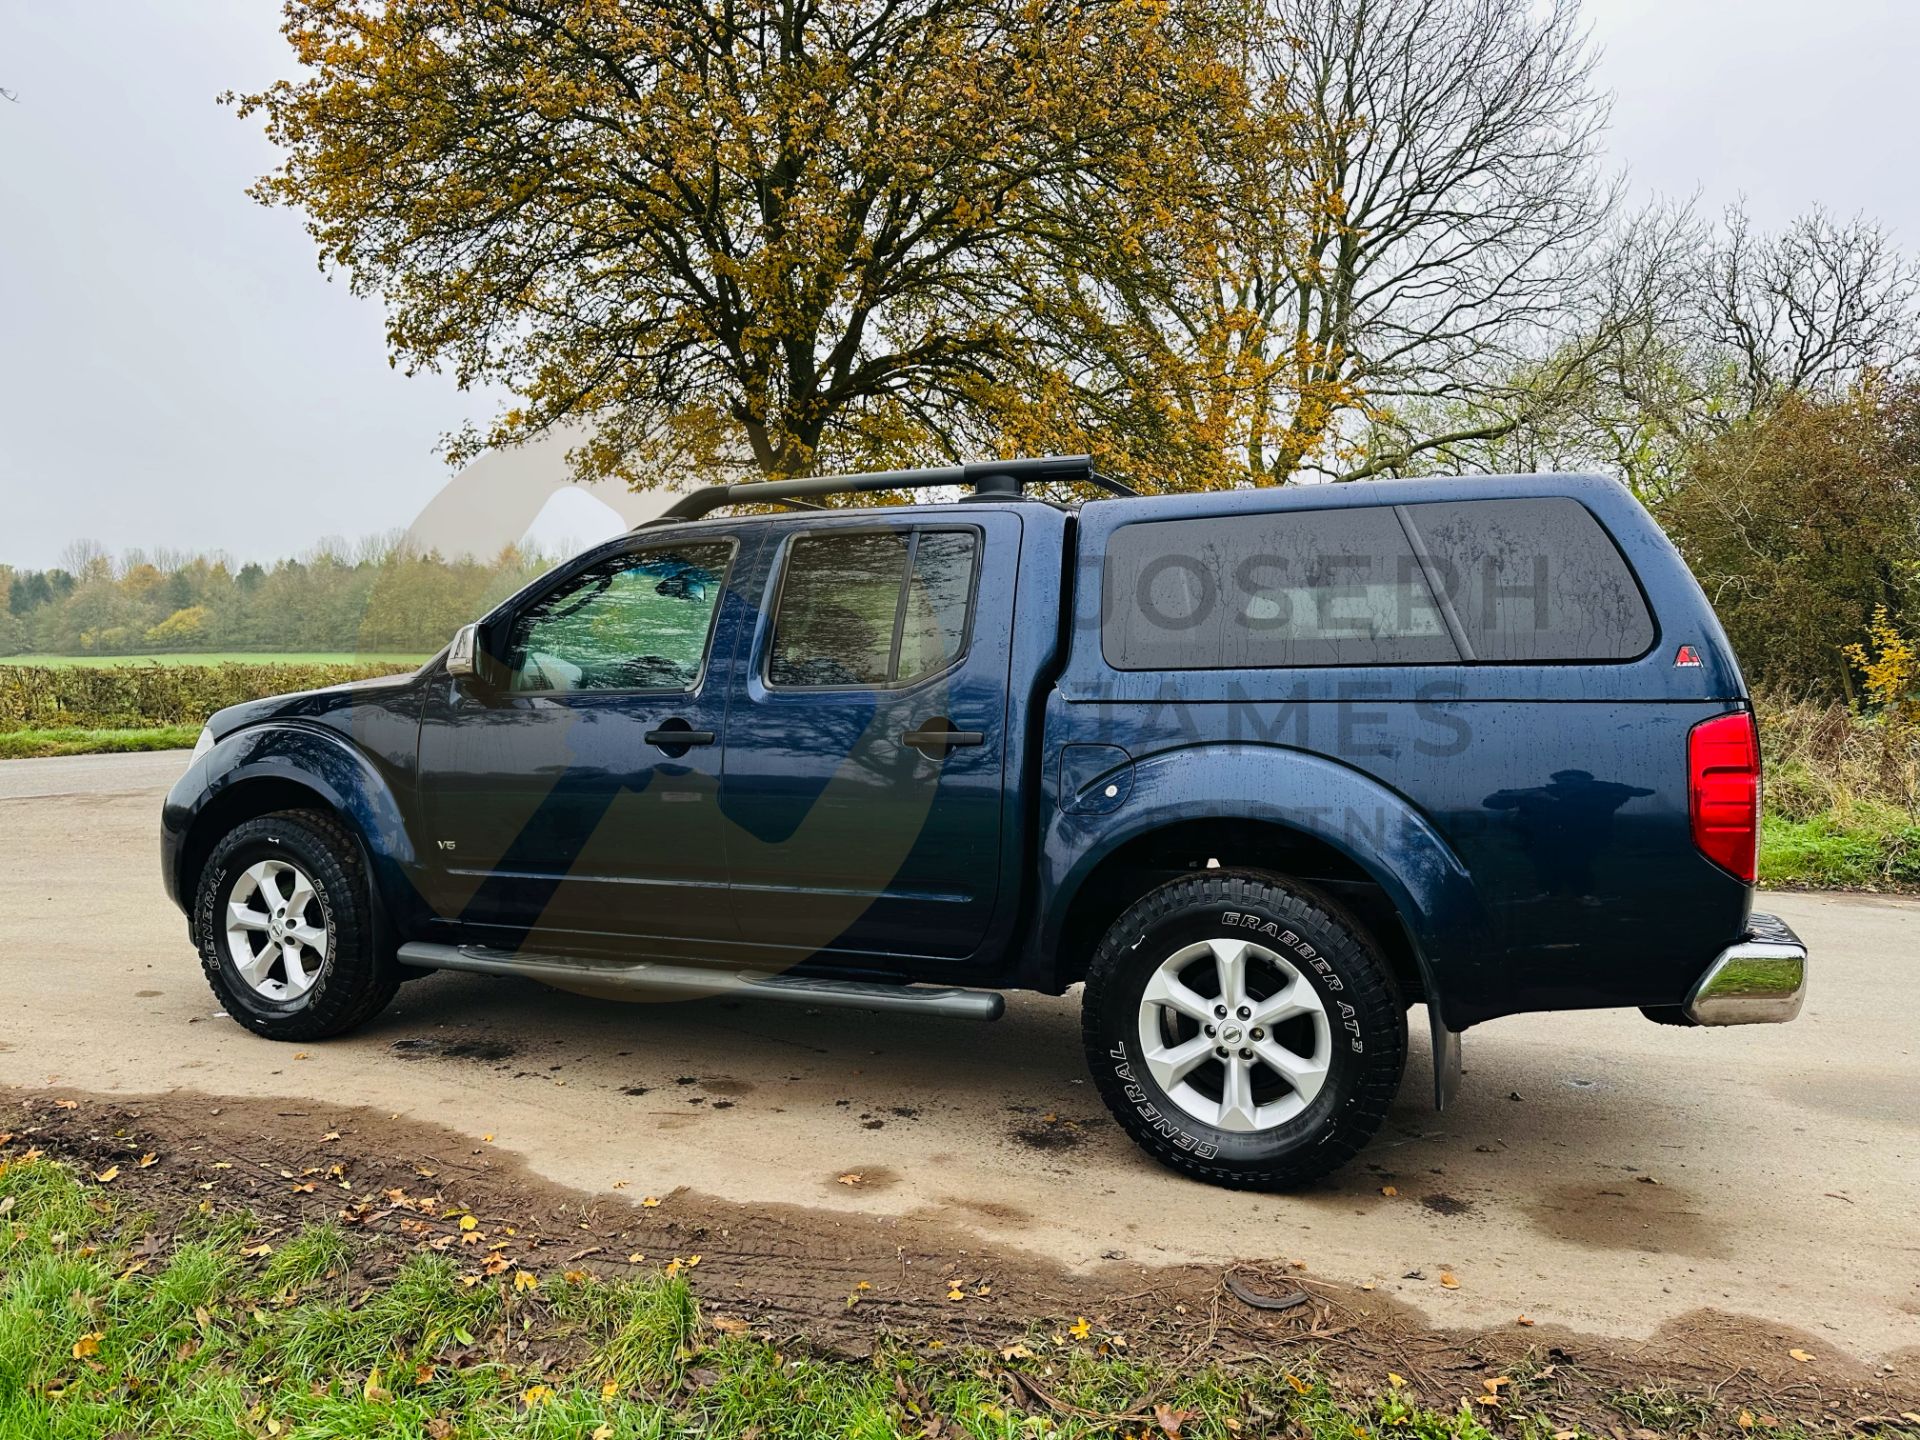 (ON SALE)NISSAN NAVARA *OUTLAW EDITION* 3.0 V6 TURBO DIESEL AUTOMATIC DOUBLE CAB PICKUP - 11 REG - Image 11 of 43